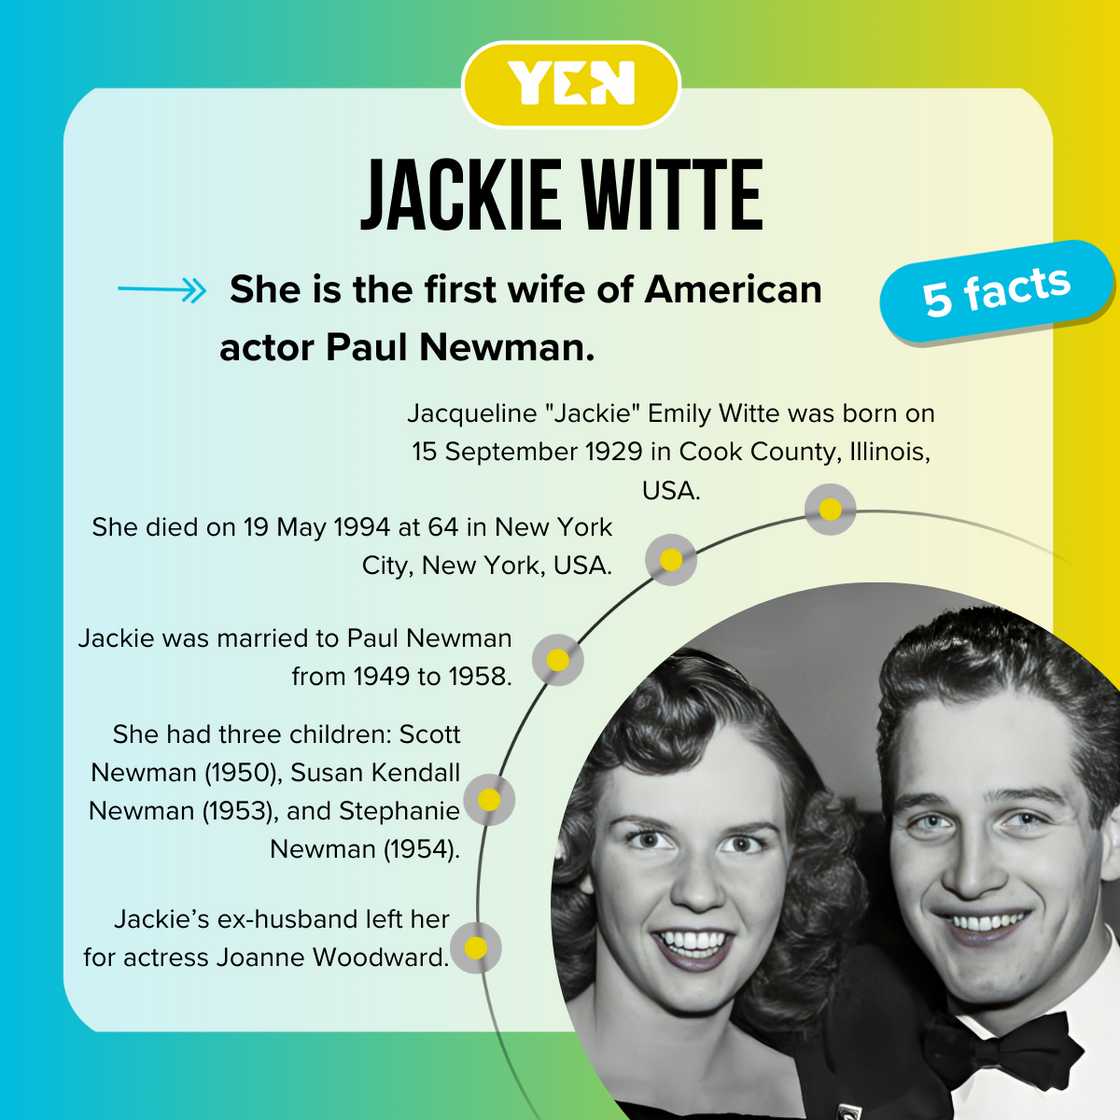 Five facts about Jackie Witte